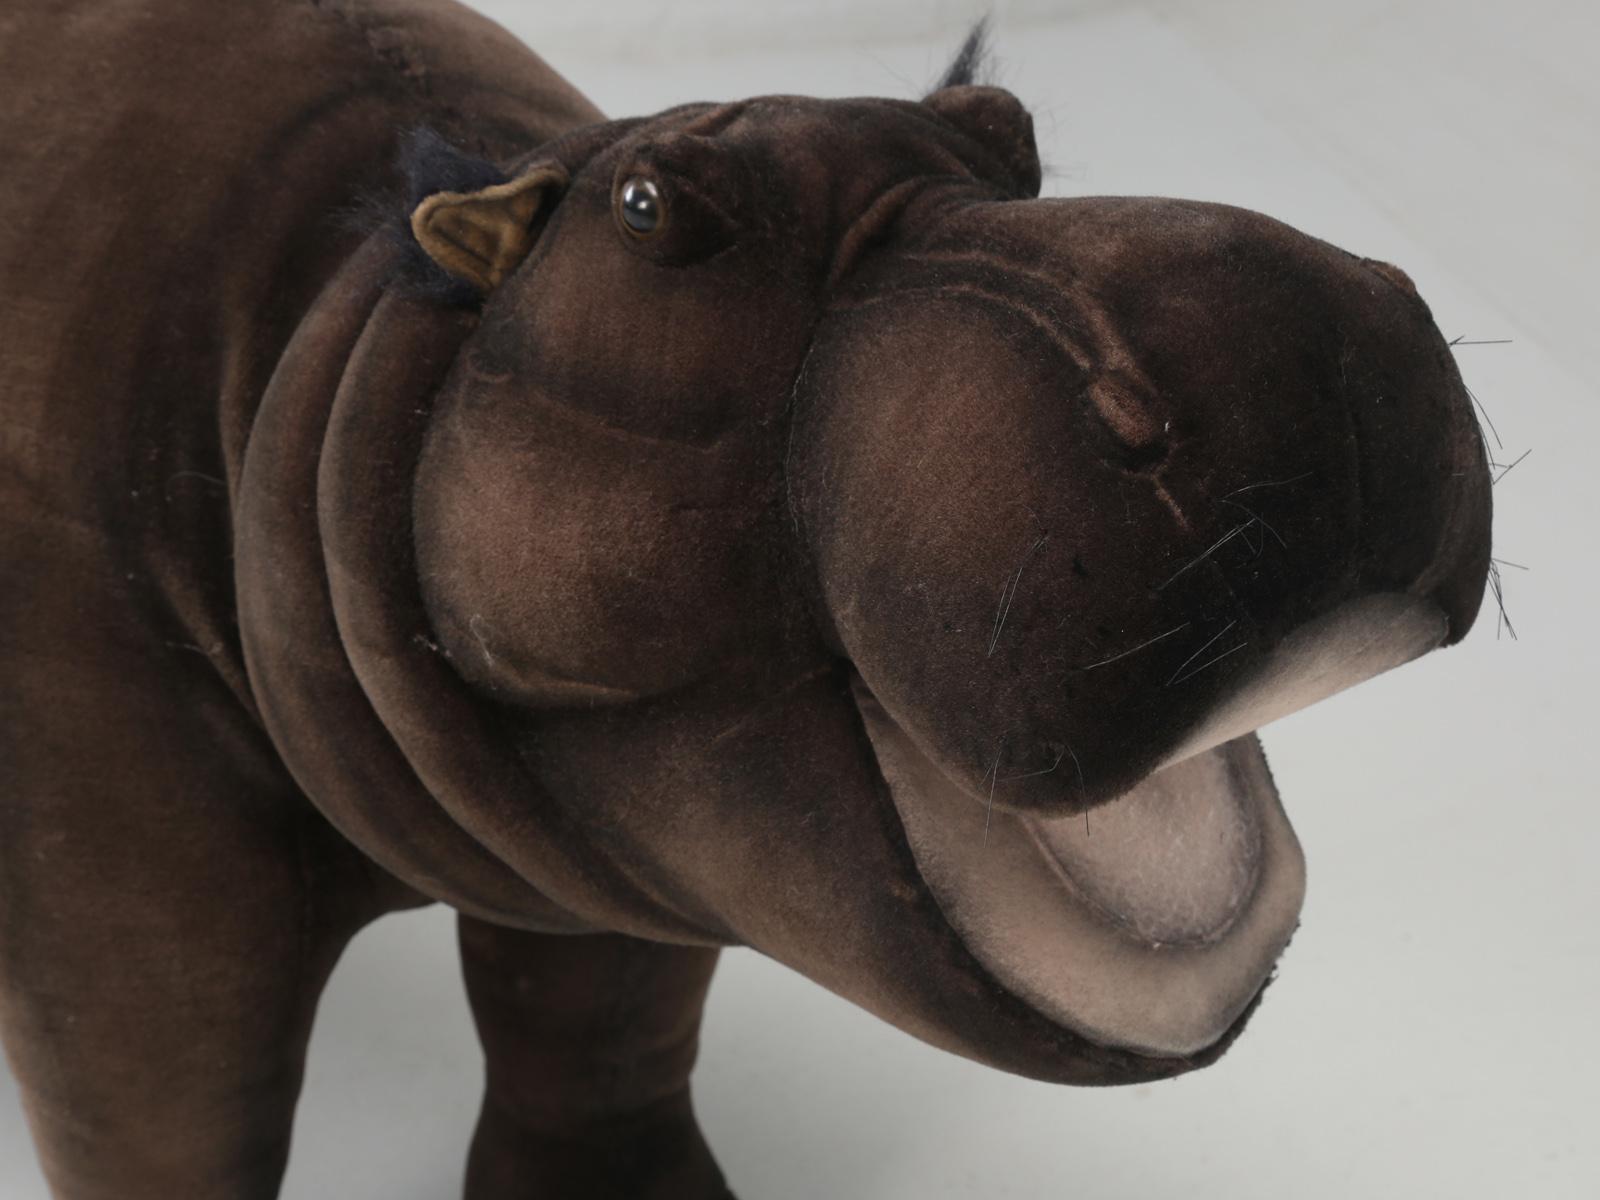 Hansa plush mechanical Stuffed Hippopotamus

Hansa was created in 1972 by German-born Hans Axthelm. Each and every Hansa stuffed Hippopotamus animal, is hand sewn using the inside-out method, in order to avoid visible seams. Each animal's face, is